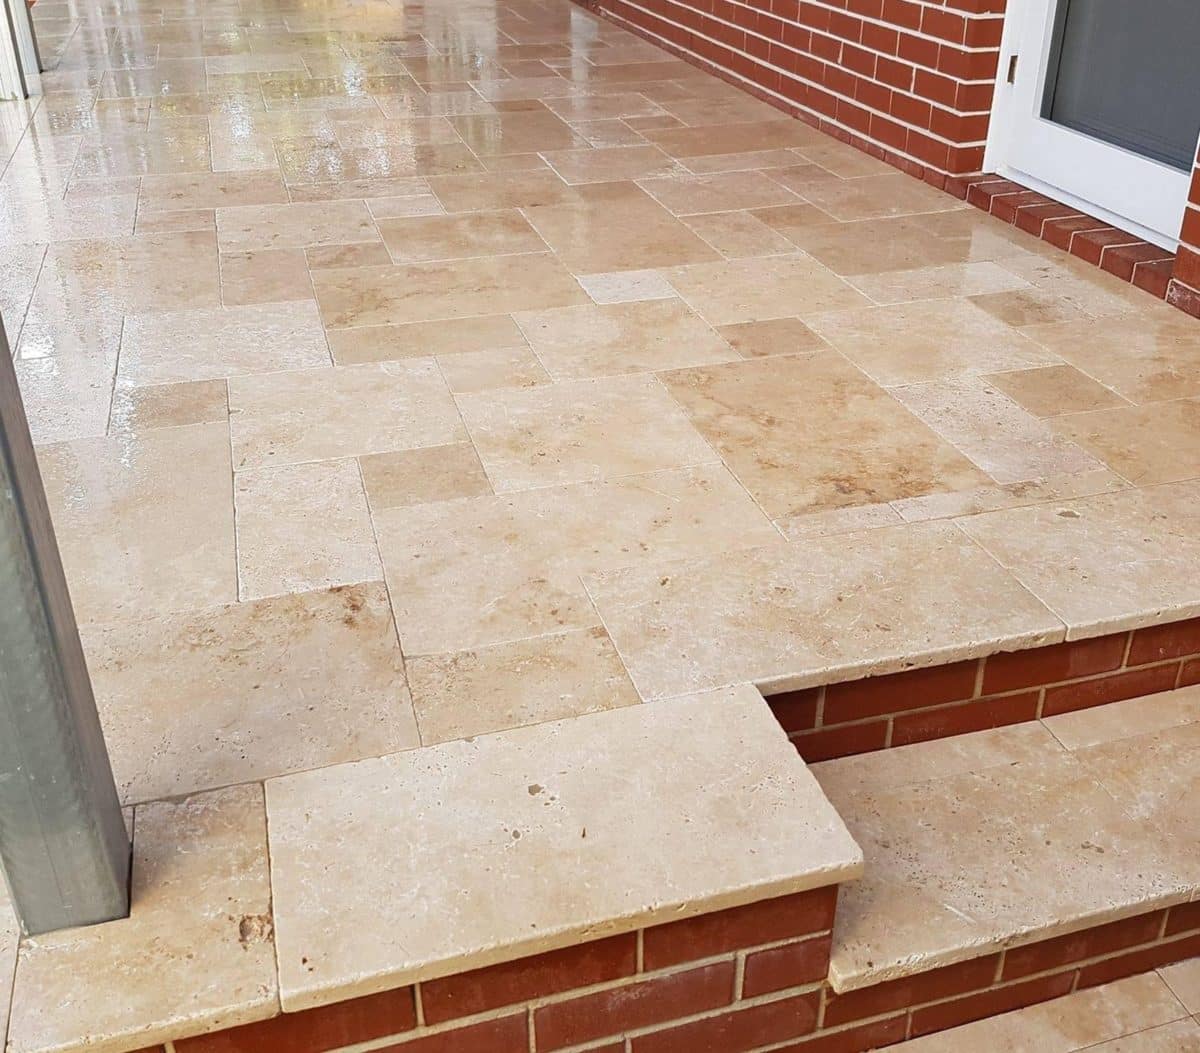 Premium Classic Travertine Pavers - Timeless elegance for your outdoor spaces. Classic Paver, Classic French Pattern, Classic Bullnose Paver, Classic Bullnose 1220 Paver, Classic Drop Edge Paver. | Parklea Sand and Soil.